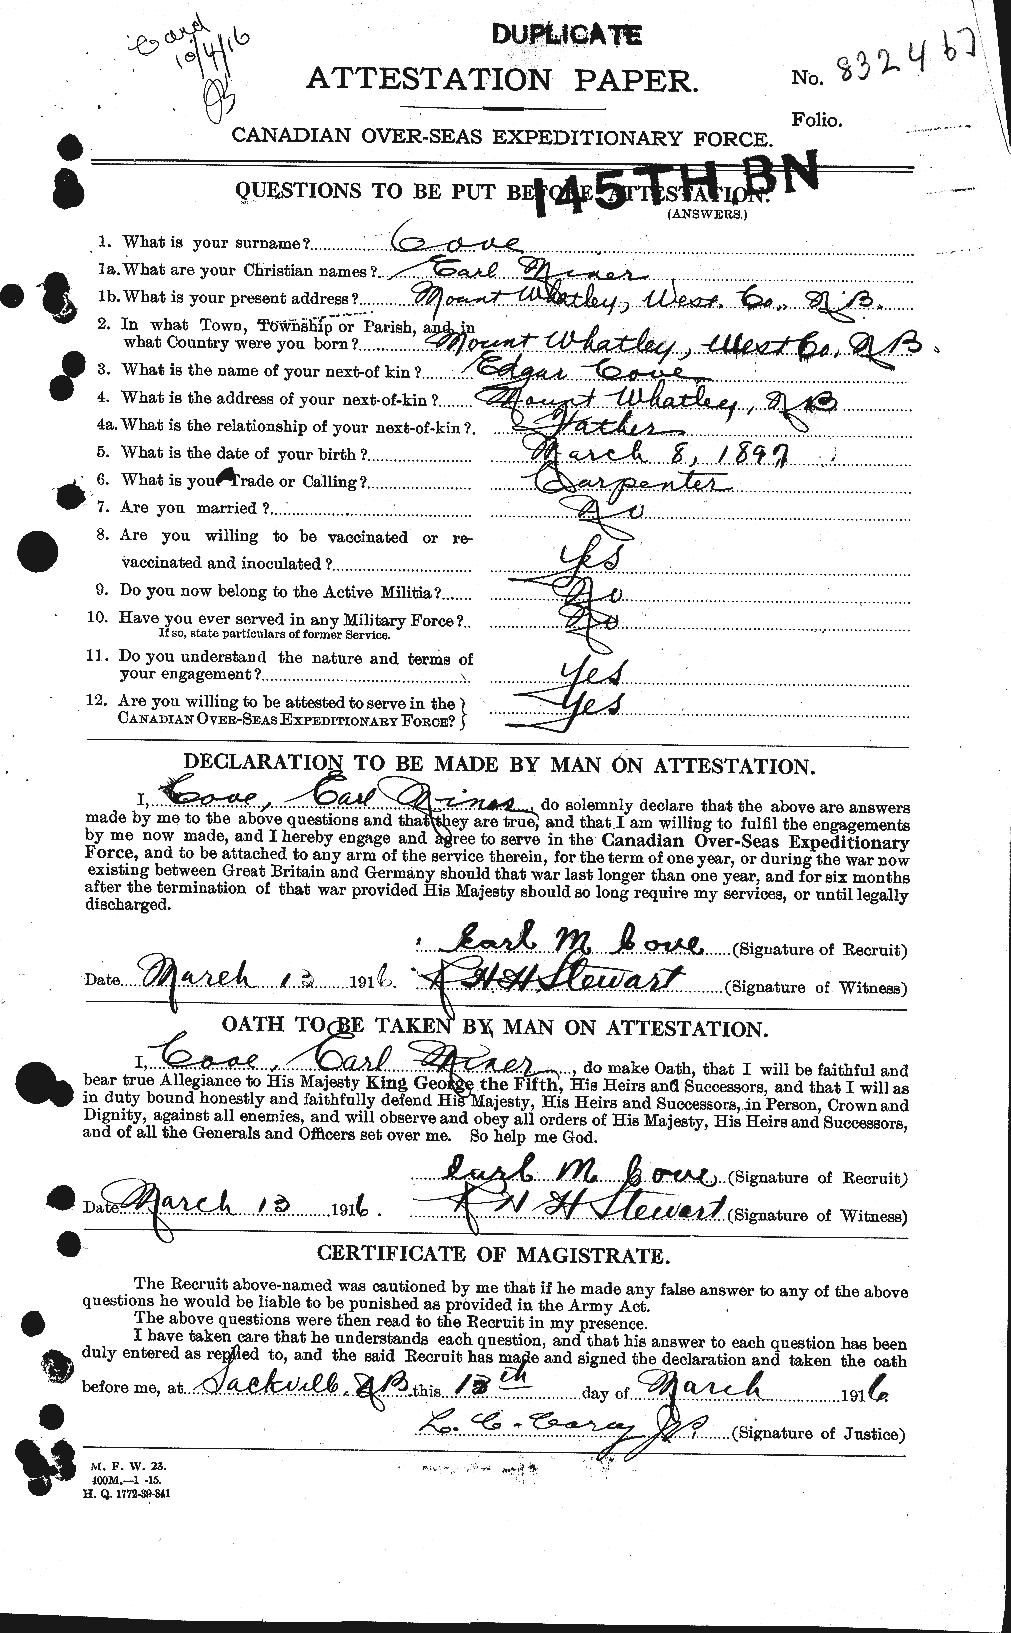 Personnel Records of the First World War - CEF 059673a